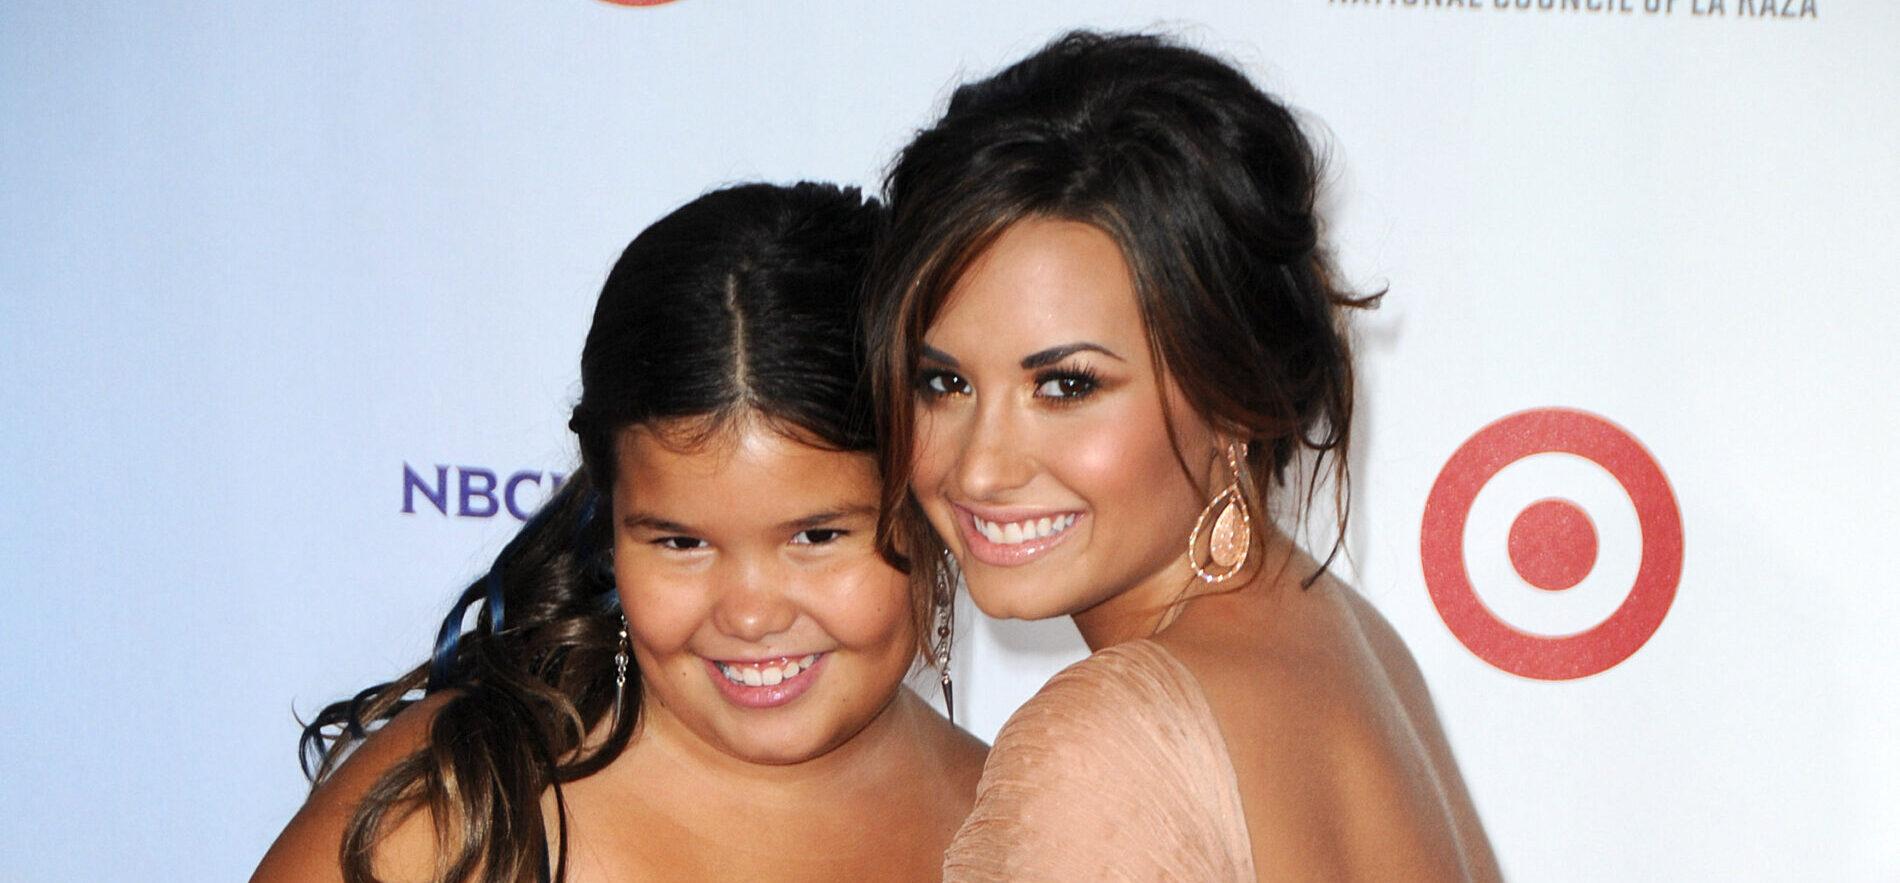 Madison De La Garza Alludes Eating Disorder To ‘Desperate Housewives’ Role